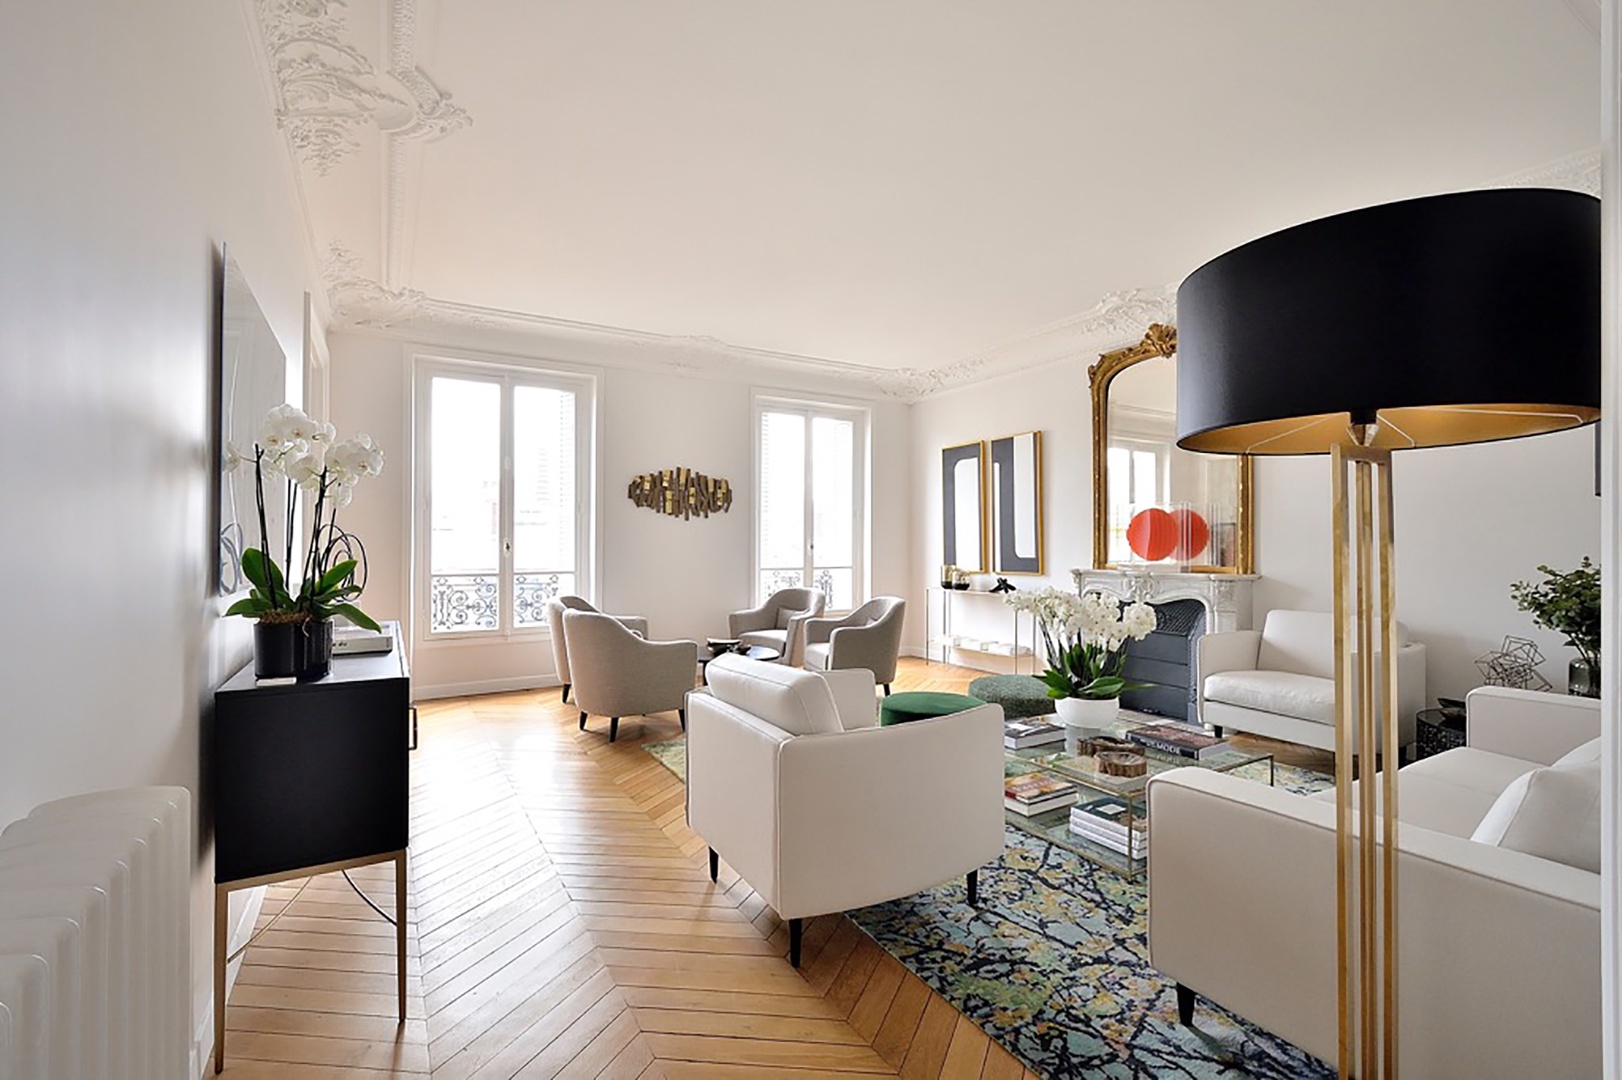 Step into the grand living room with an Eiffel Tower view.